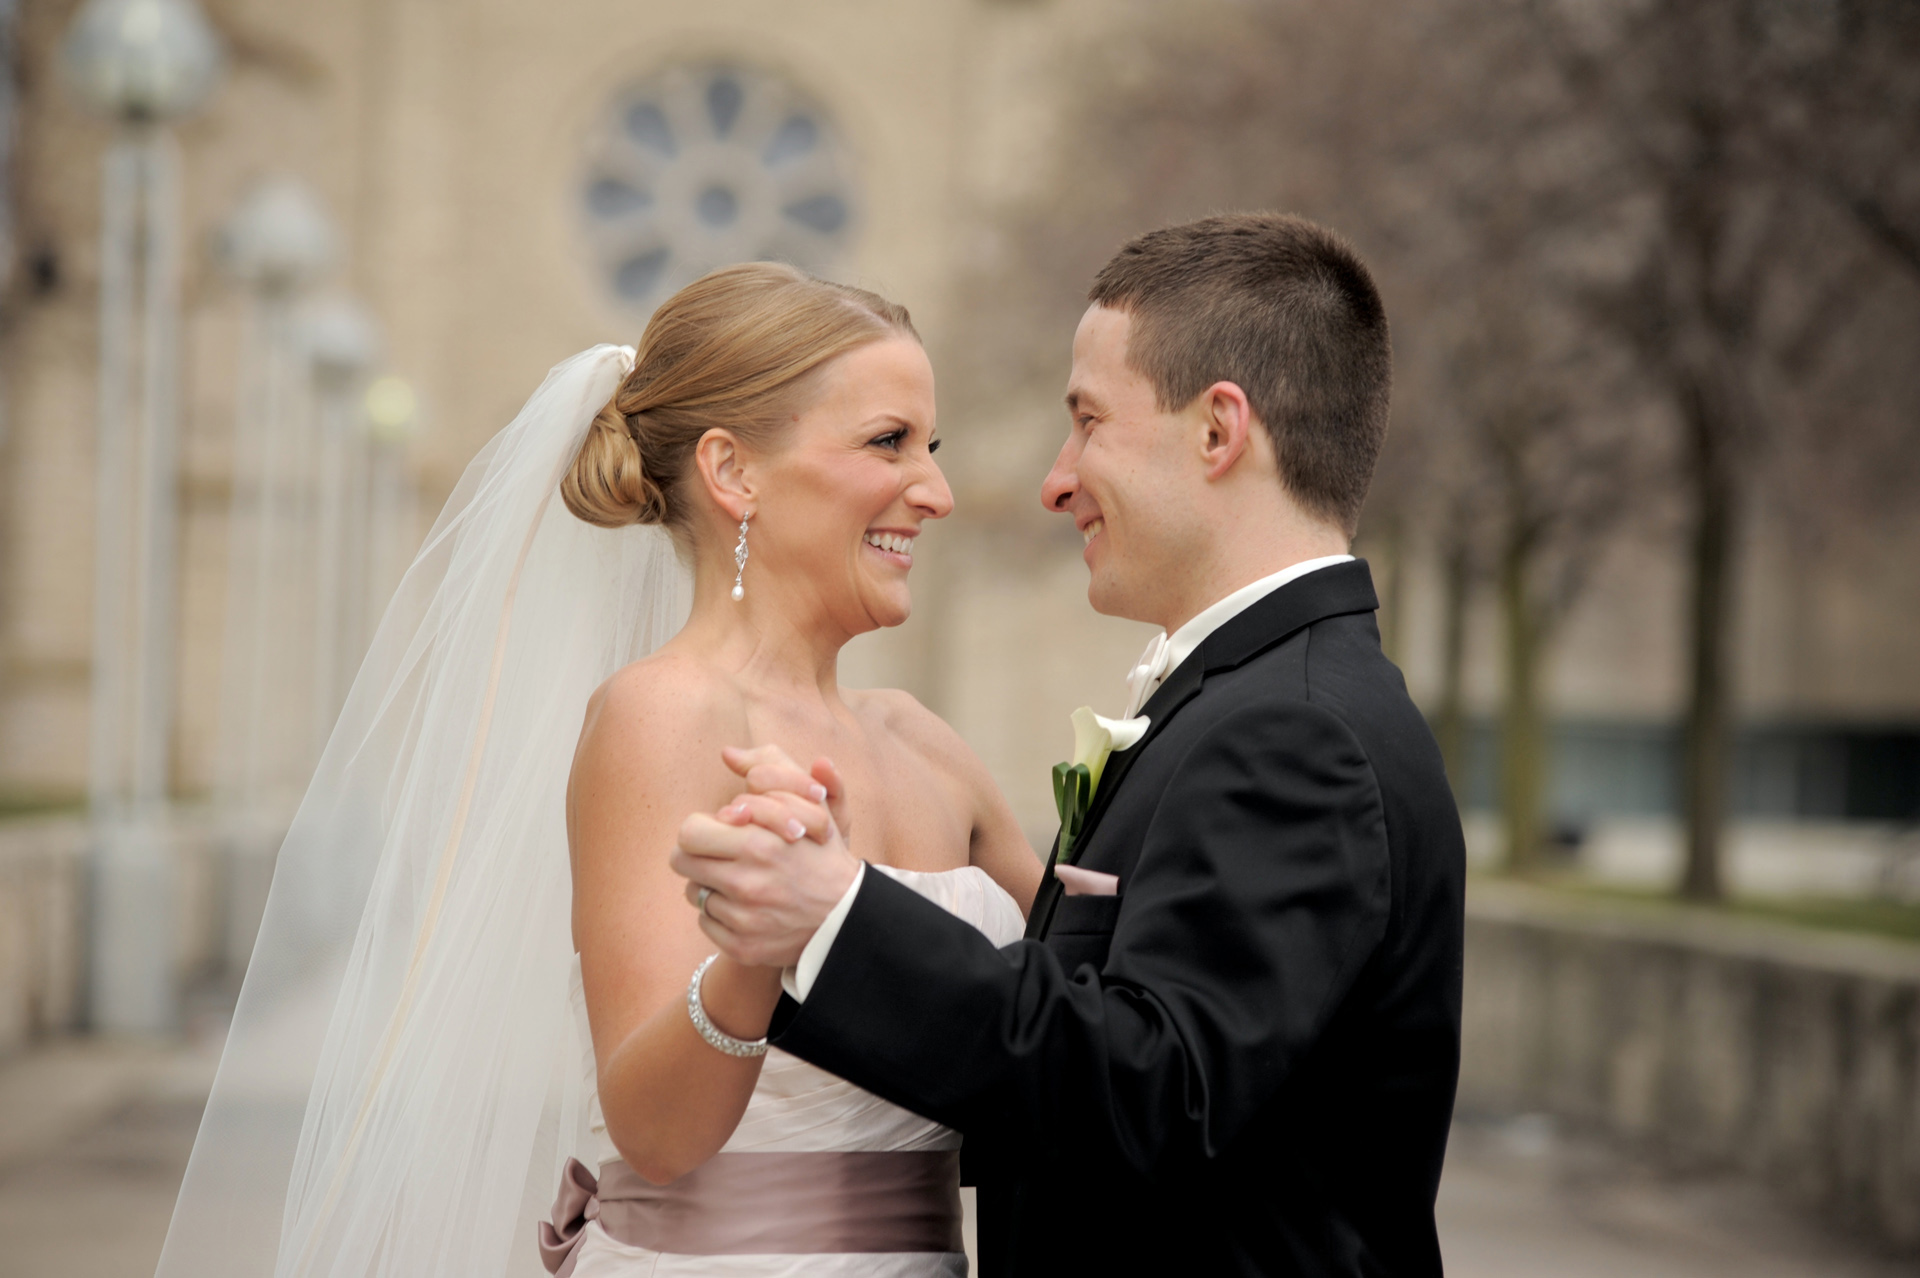 A windy winter wedding in Michigan photographer's photo of the wedding couple dancing in Detroit, Michigan, Michigan wedding venue St. Aloysius Detroit, Michigan and the Detroit Athletic Club.